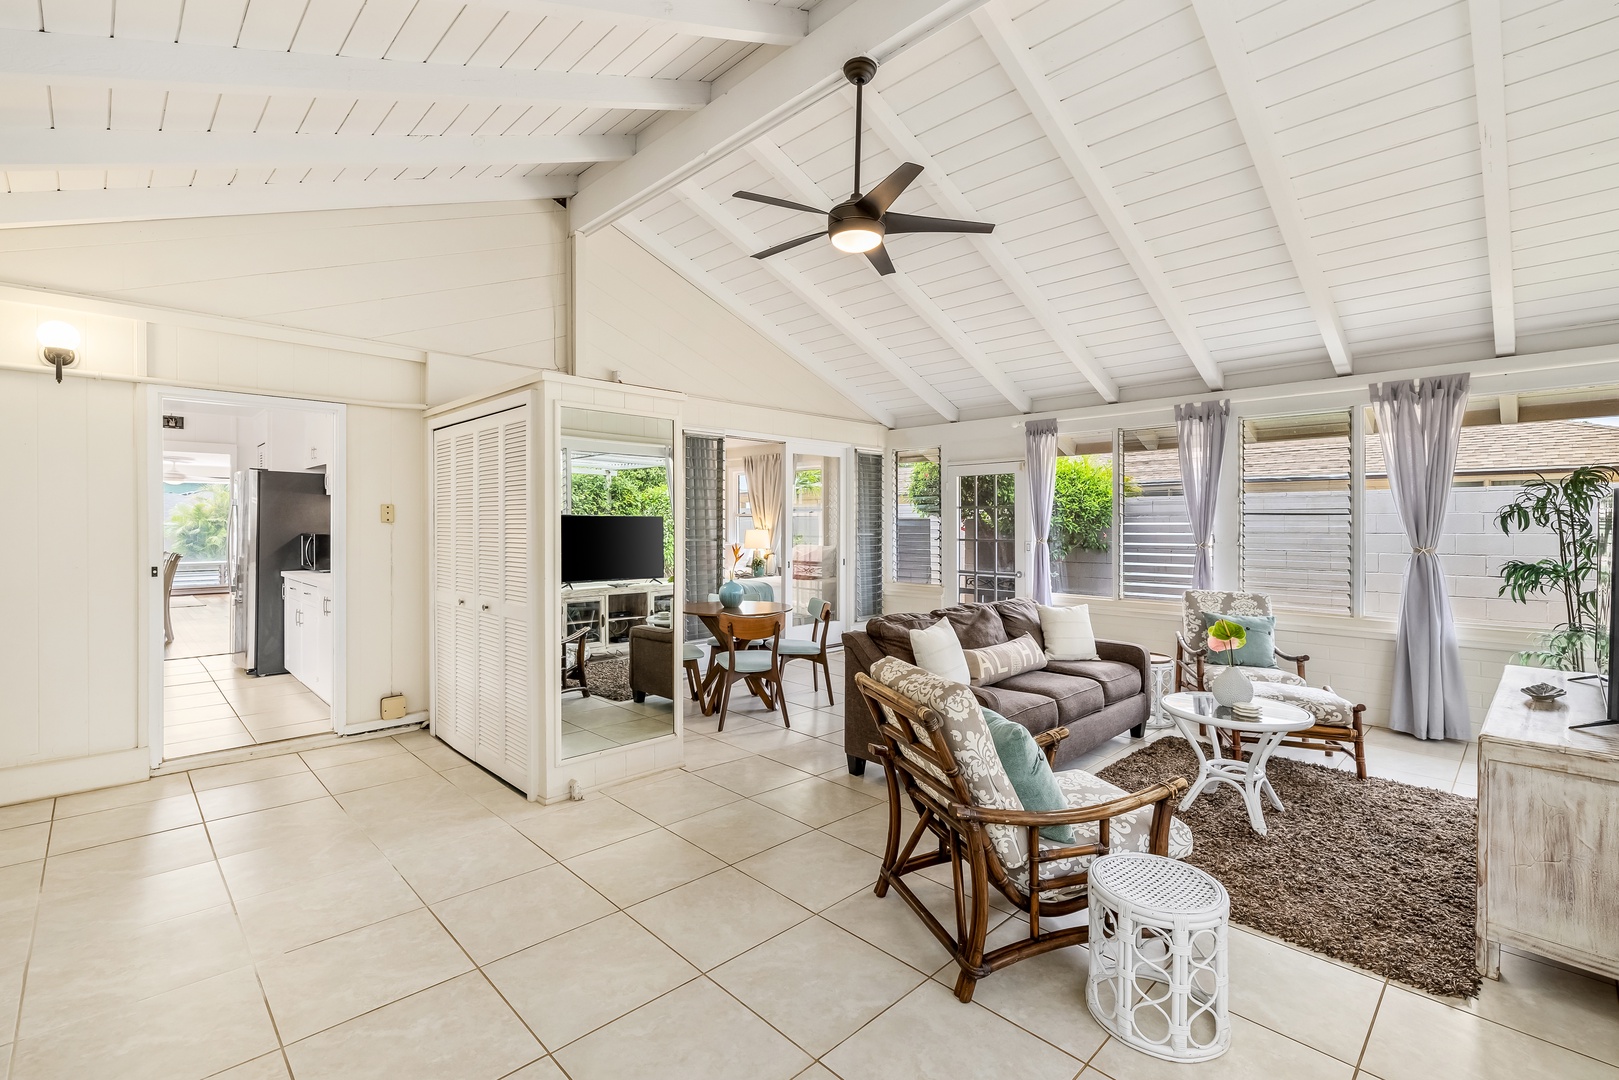 Honolulu Vacation Rentals, Kahala Cottage - The home has an open-concept floorplan allowing seamless flow and connection.